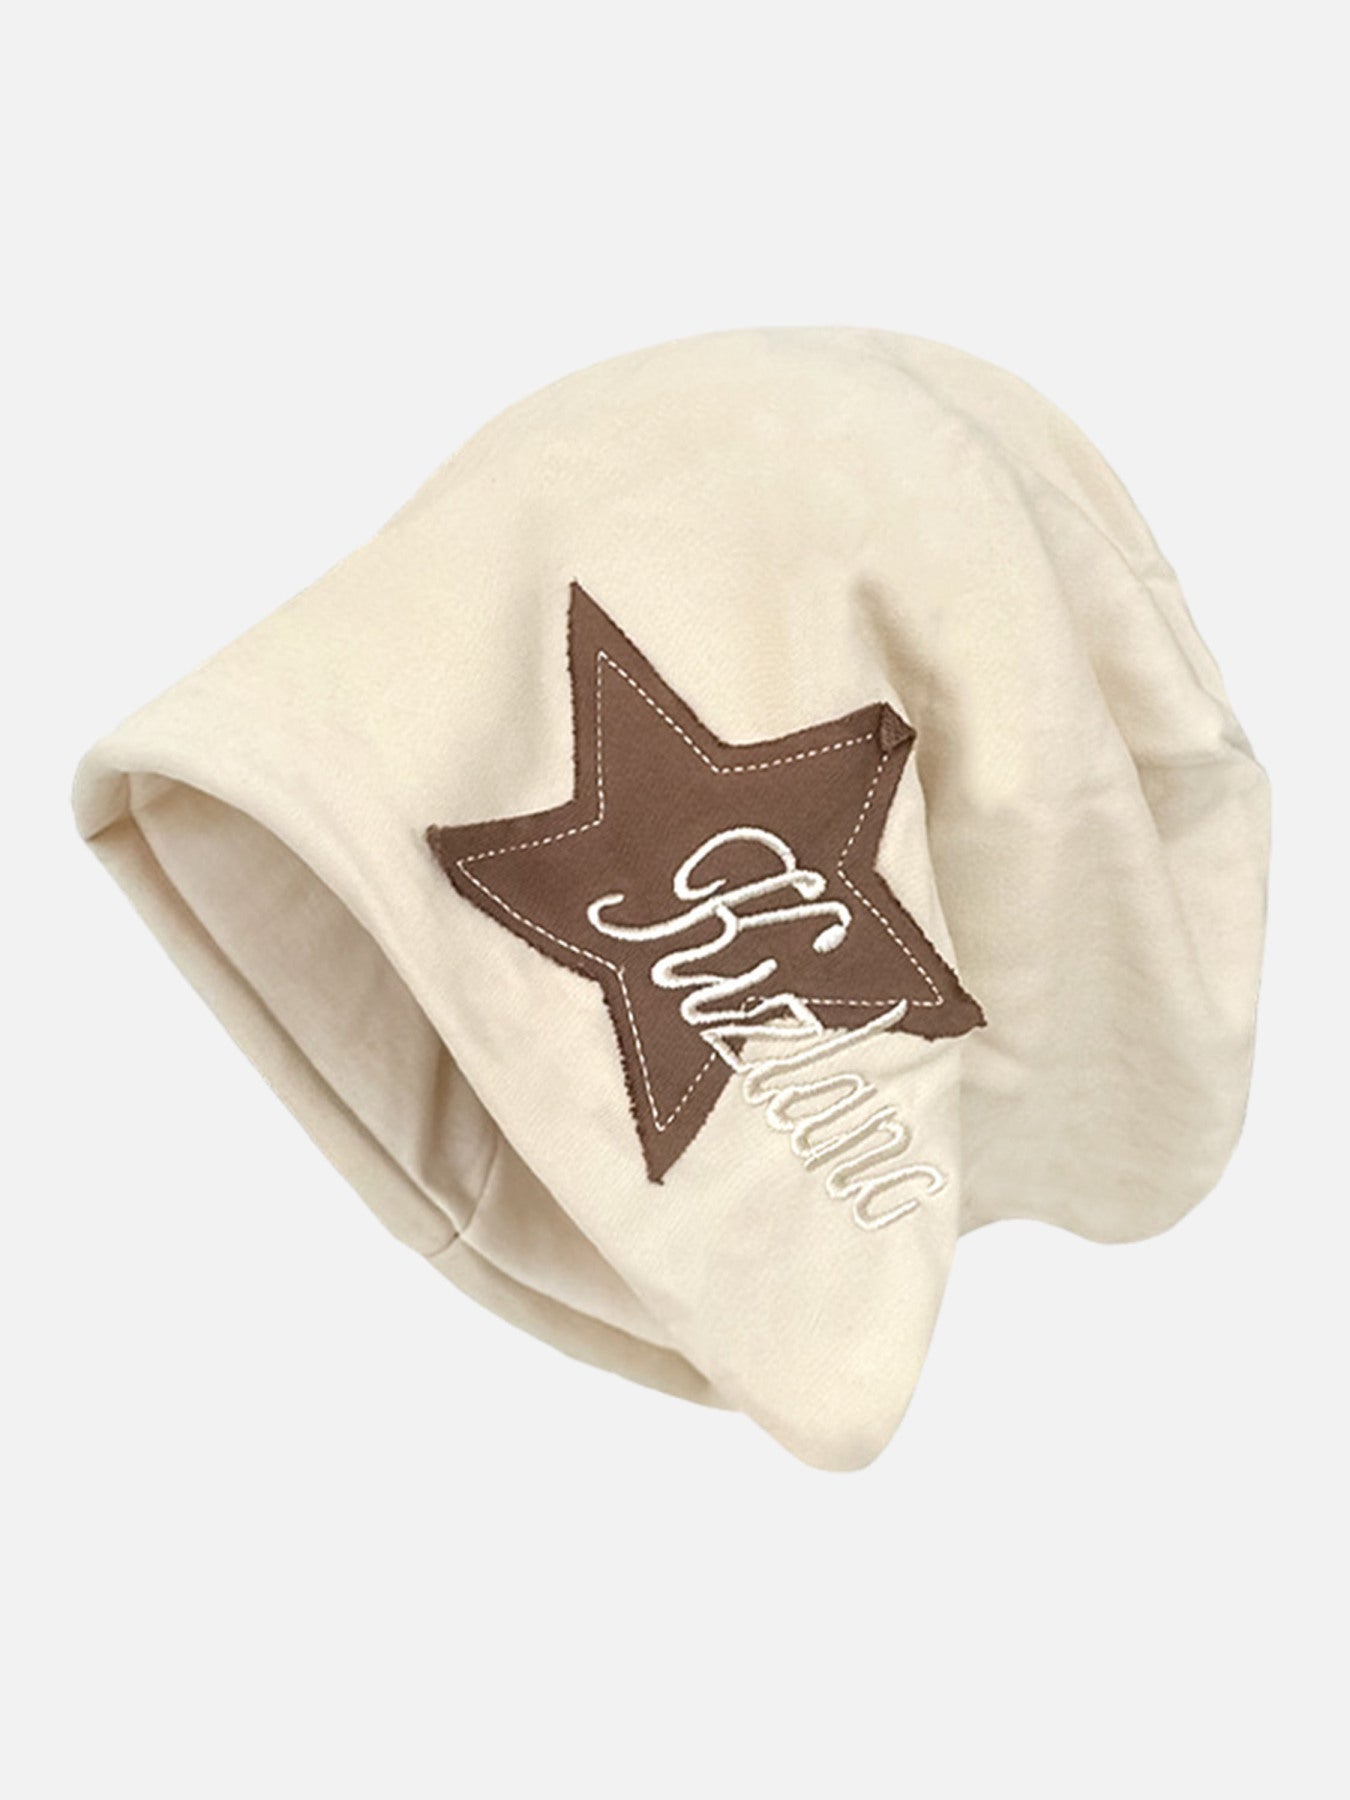 The Supermade American Star Embroidered Wrap Hat